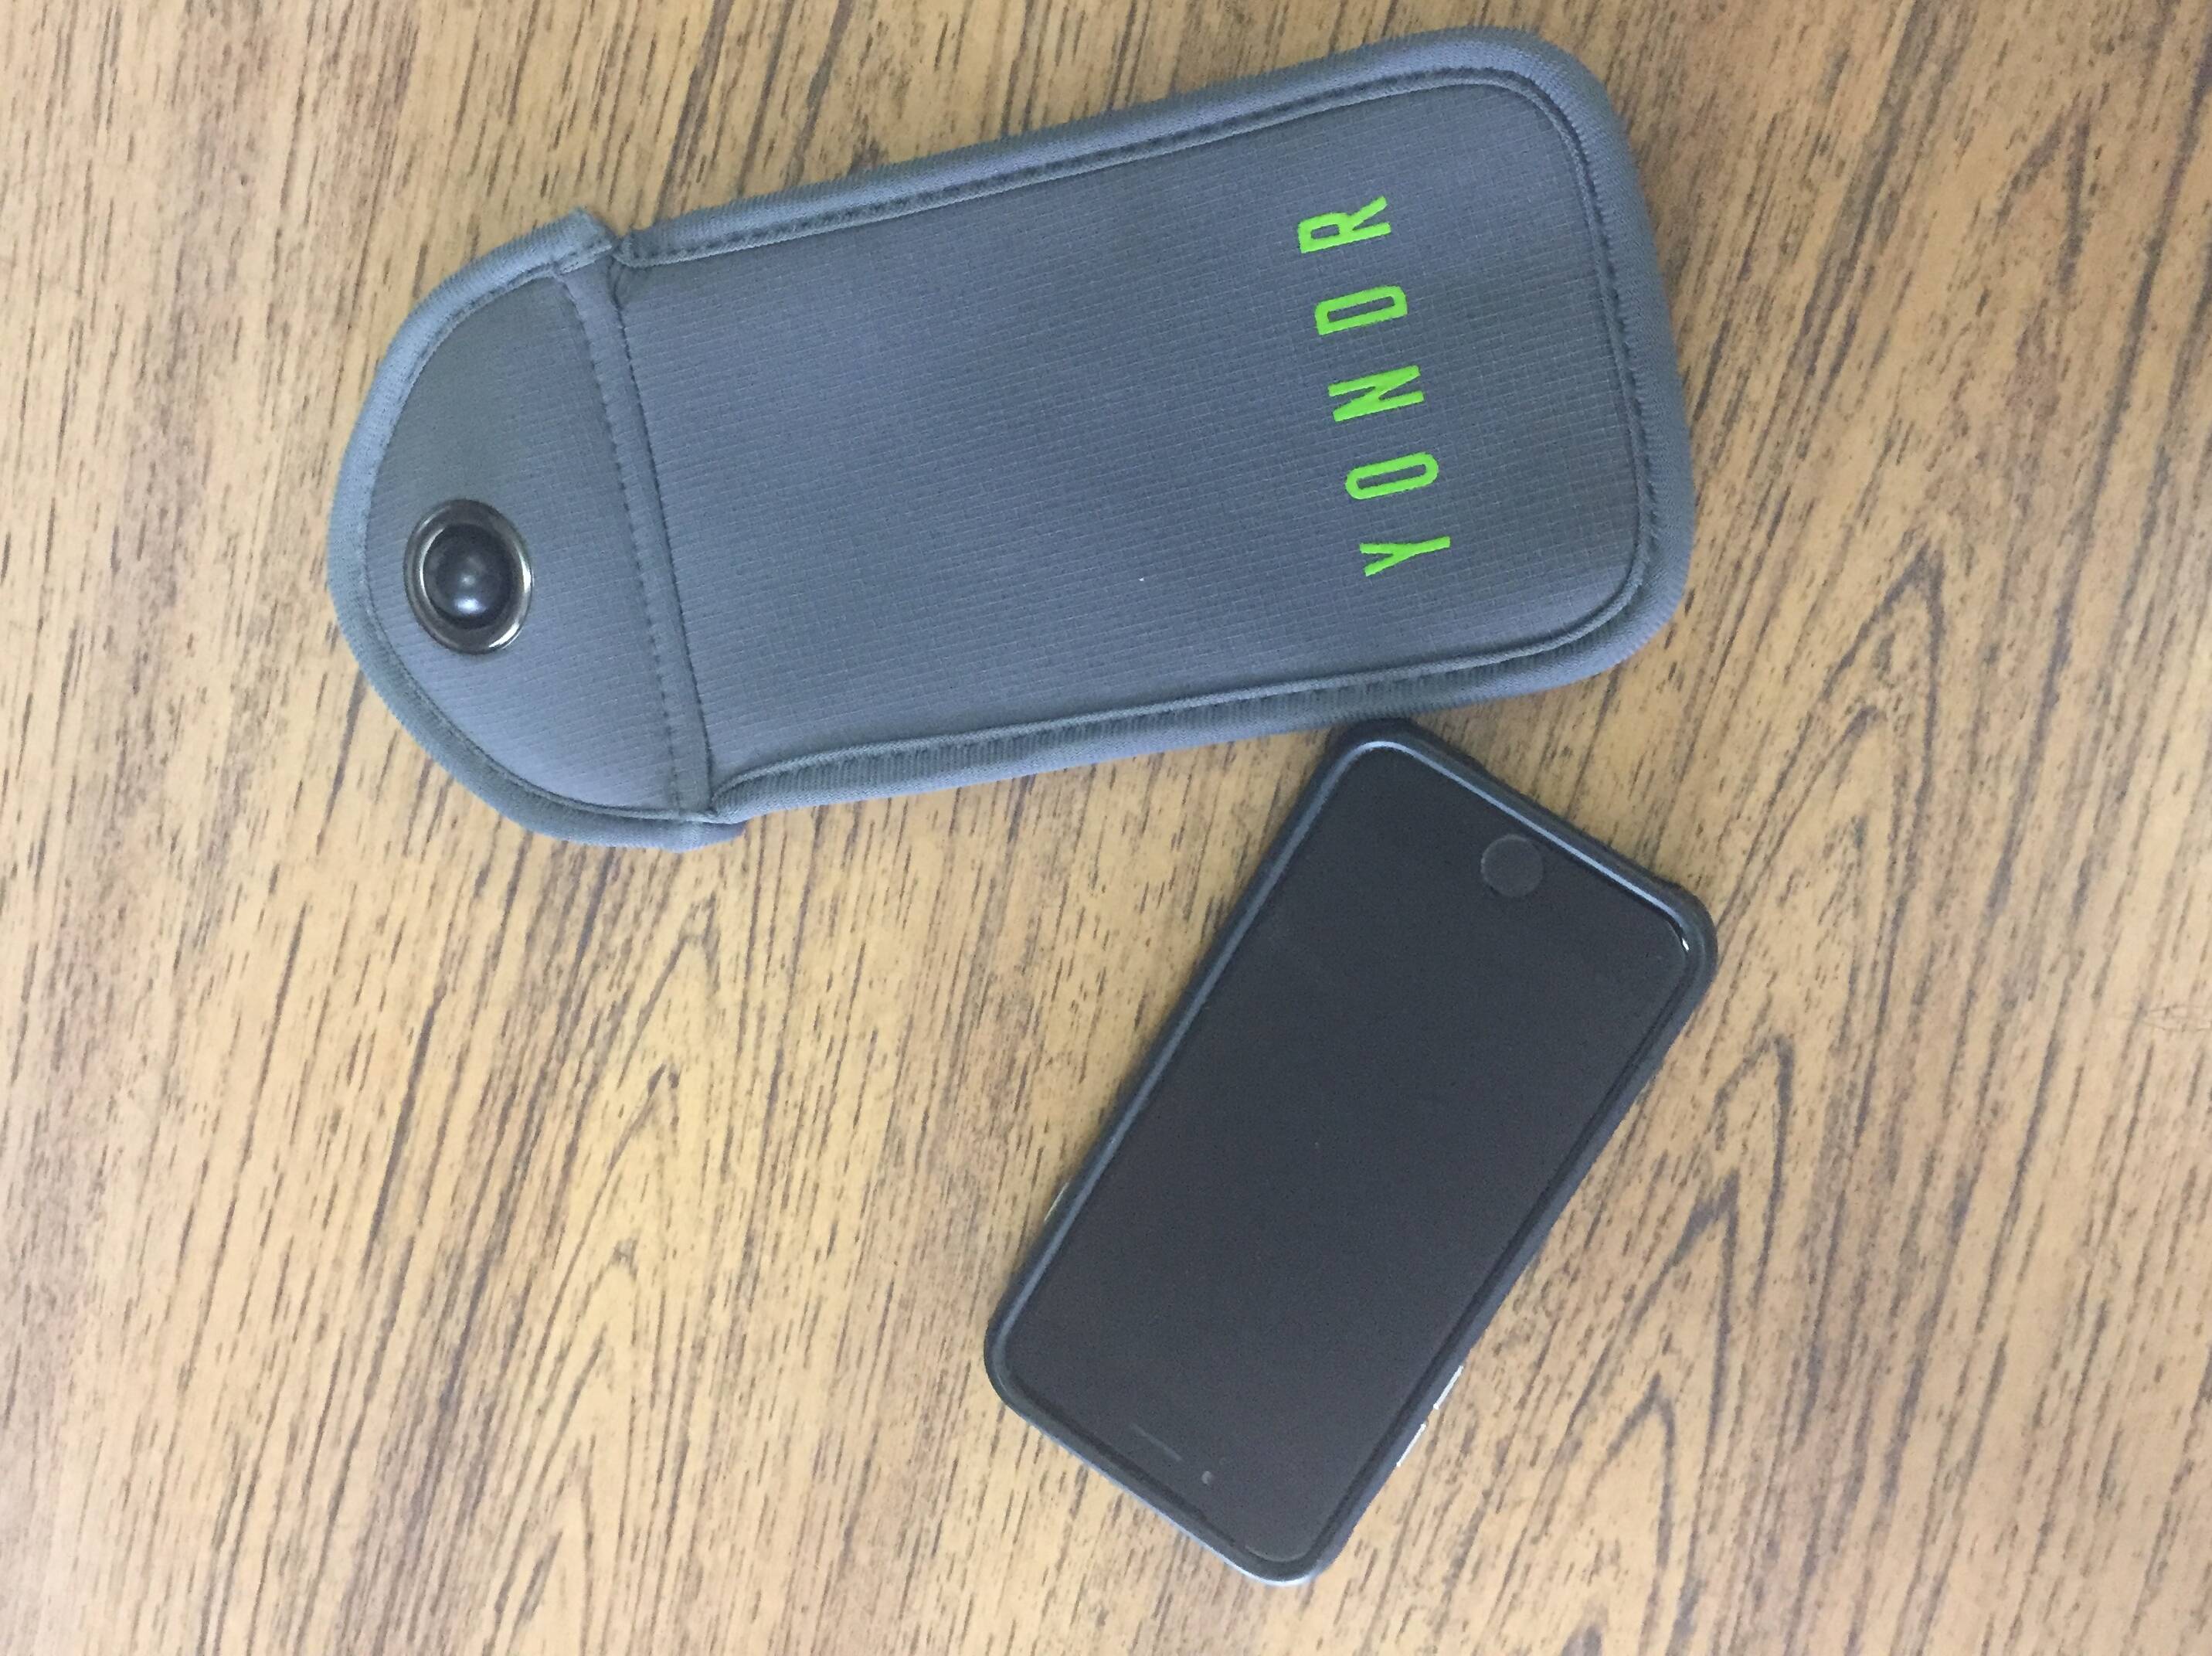 Students already benefiting from phone pouch trial at SA school